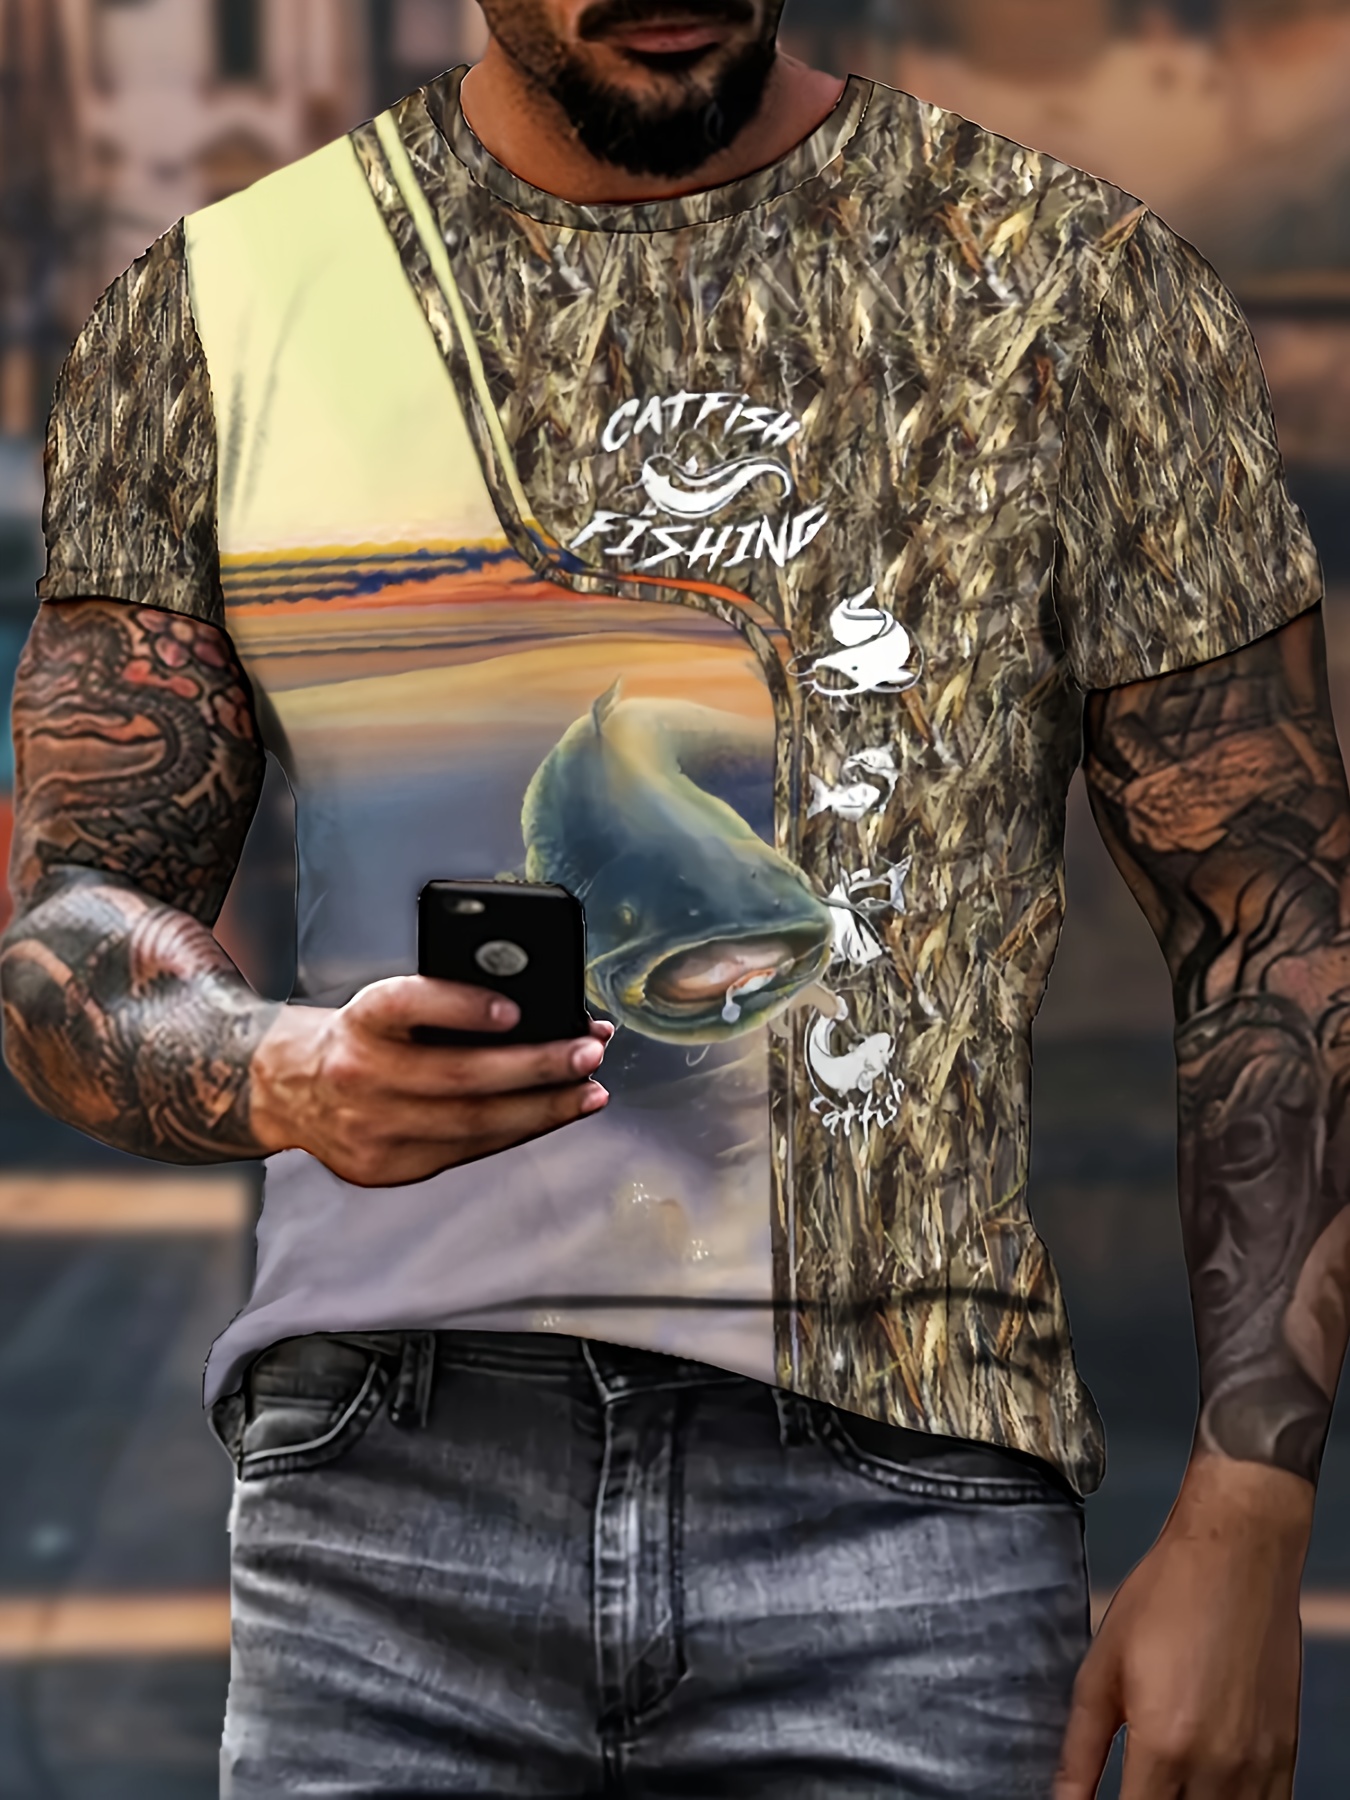 Catfish Fishing Pattern Print Men's Comfy Chic T-shirt, Graphic Tee Men's  Summer Outdoor Clothes, Men's Clothing, Tops For Men, Gift For Men